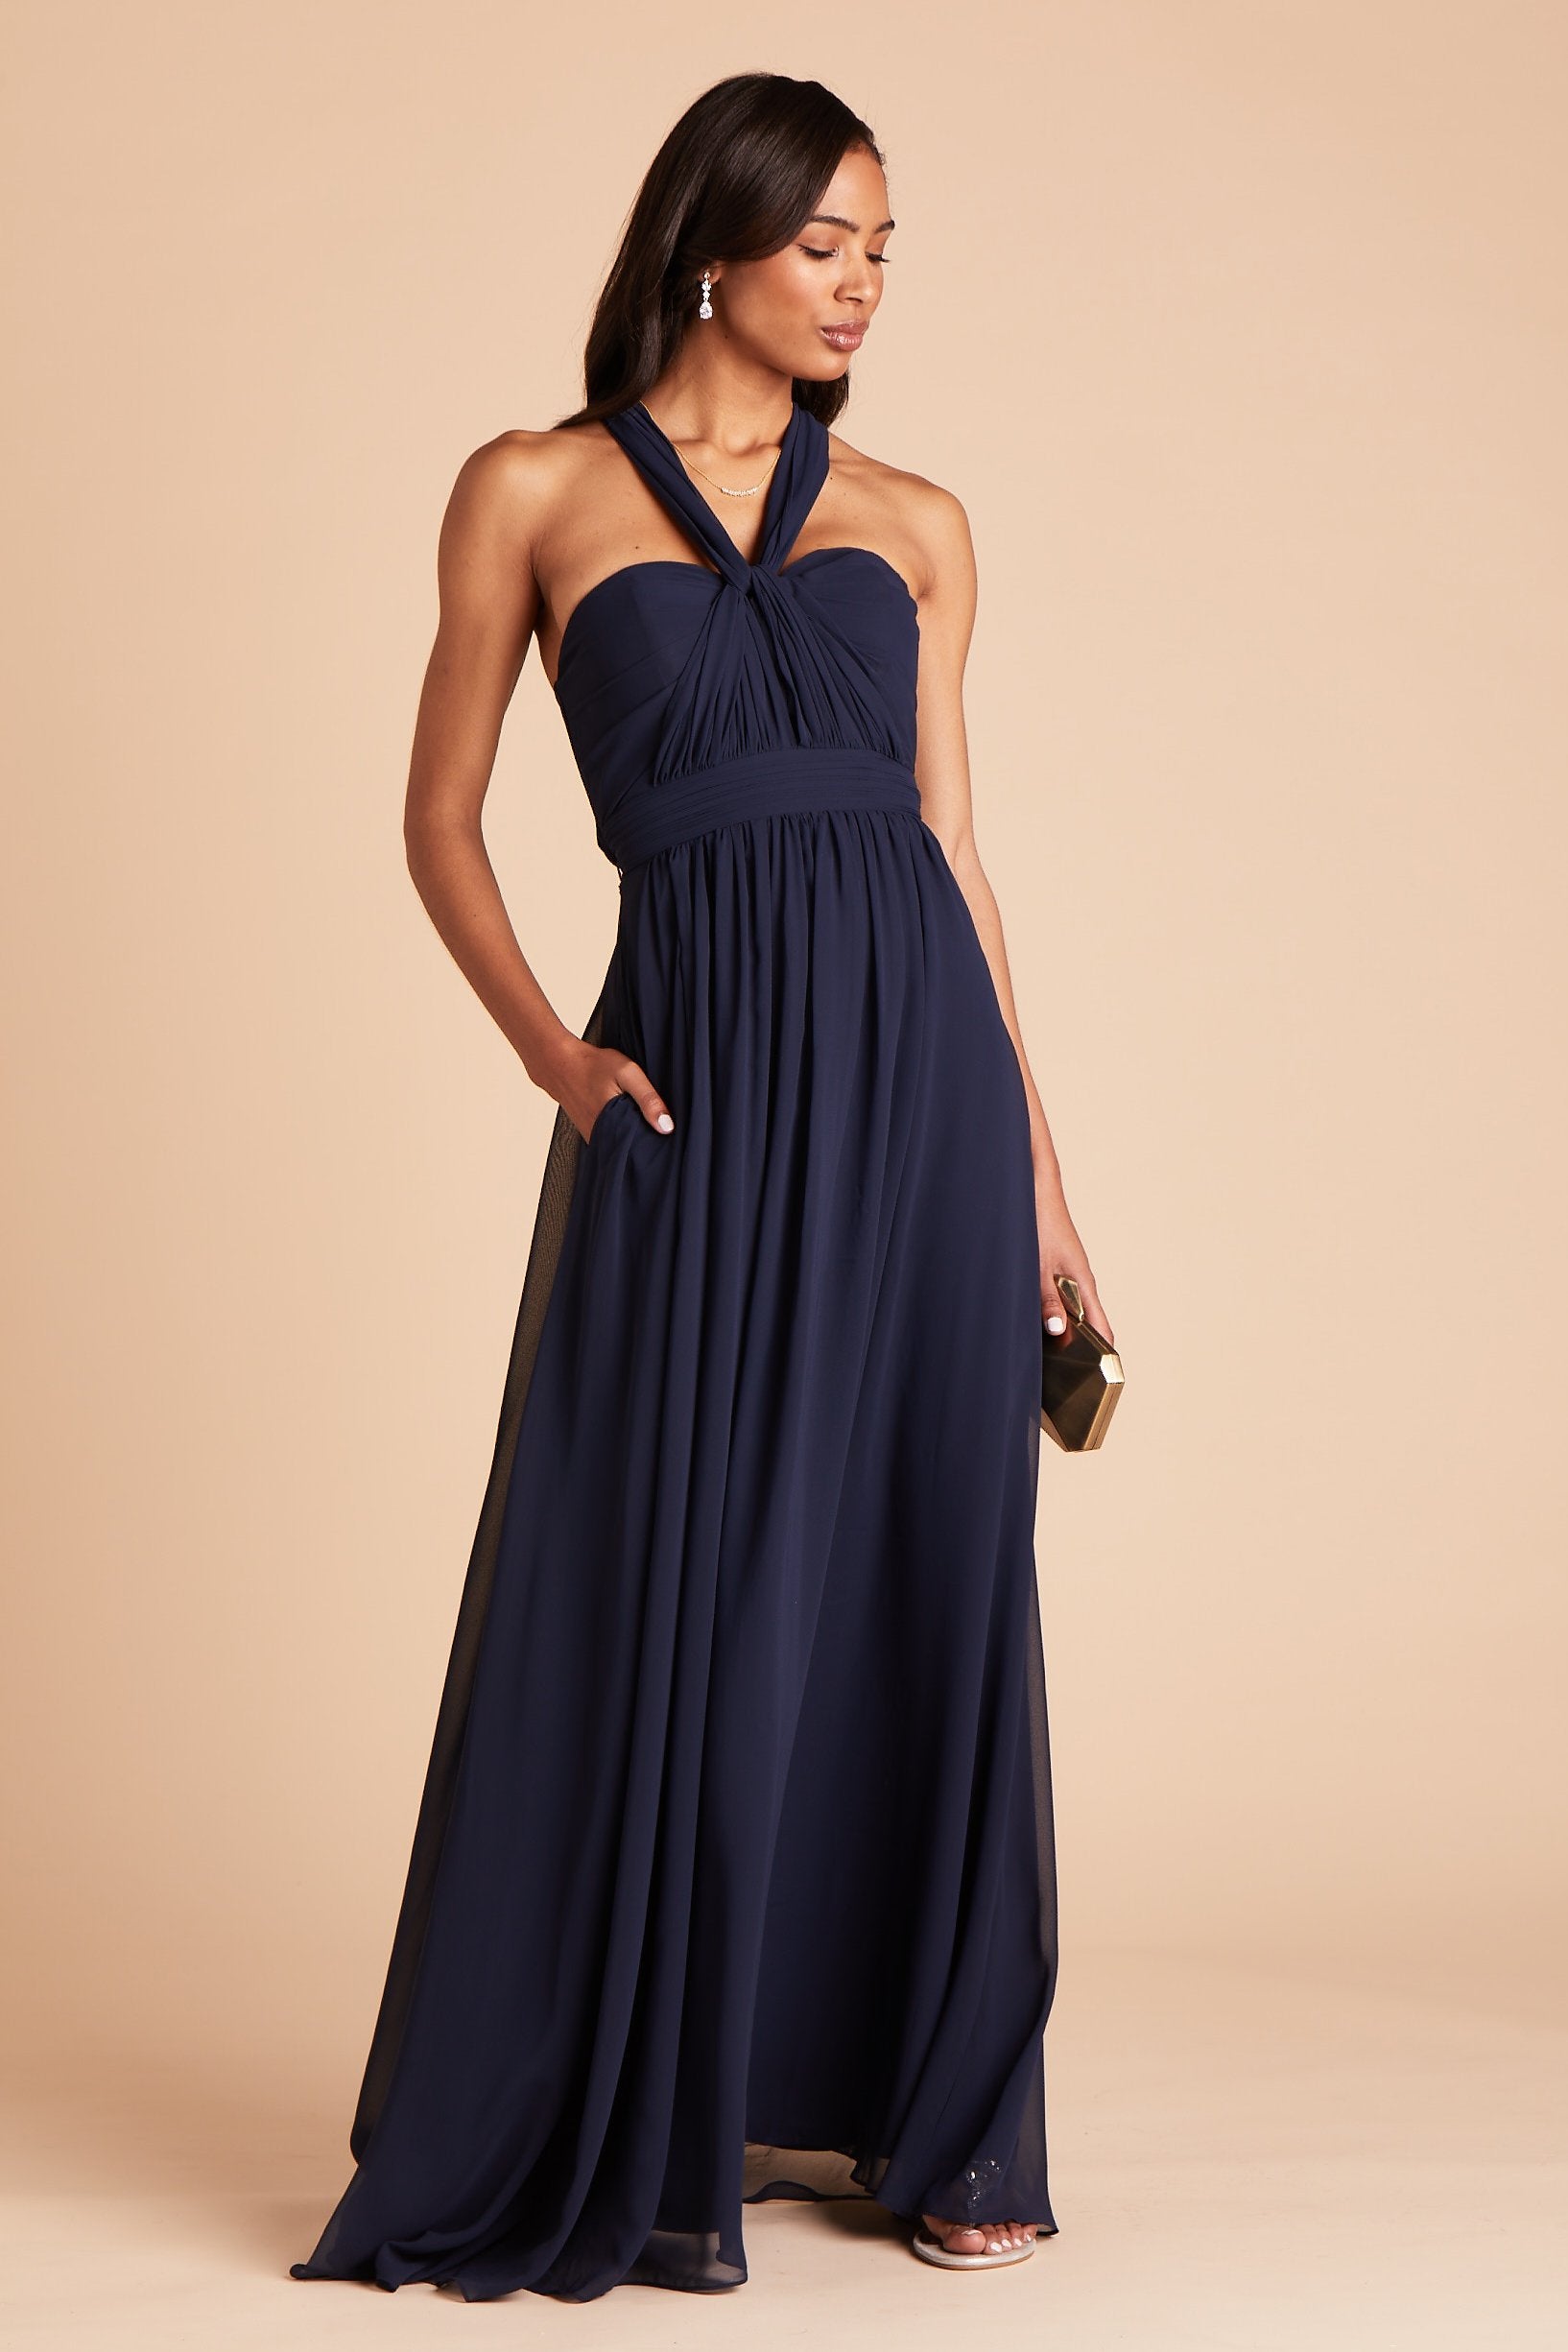 Grace convertible bridesmaid dress in navy blue chiffon by Birdy Grey, front view with hand in pocket 